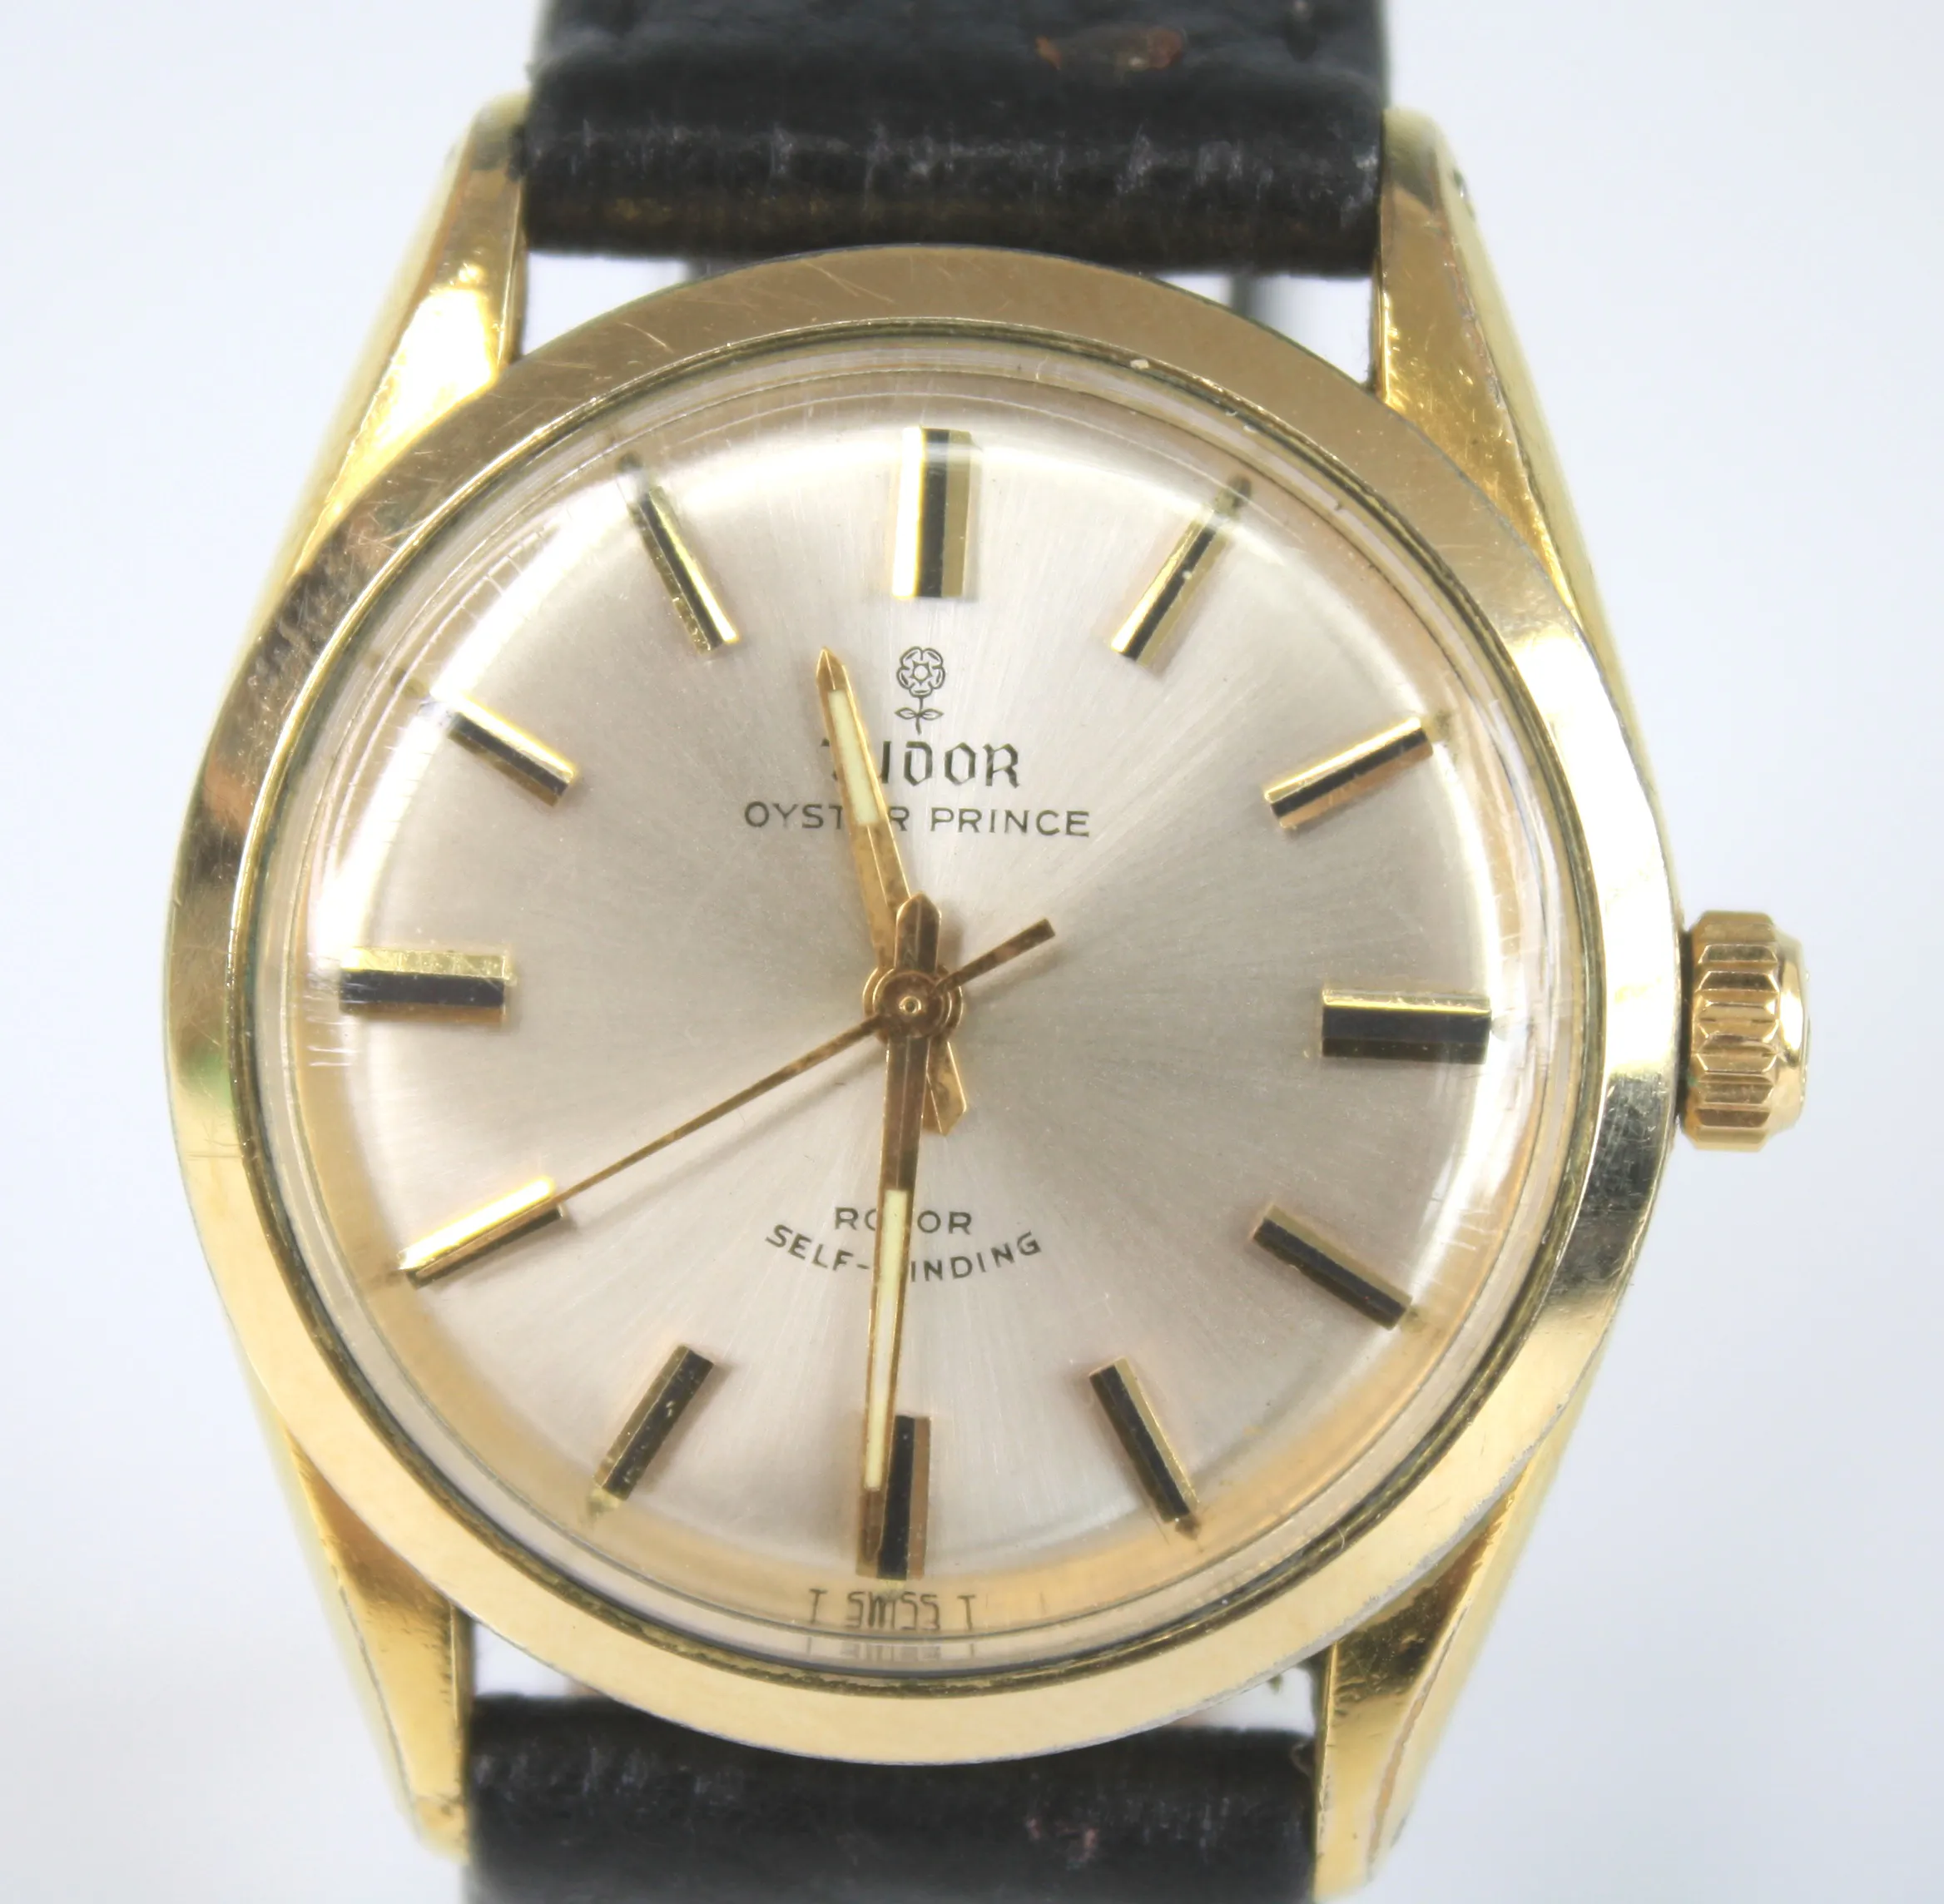 Tudor Oyster Prince 7965 34mm Gold-plated Silver